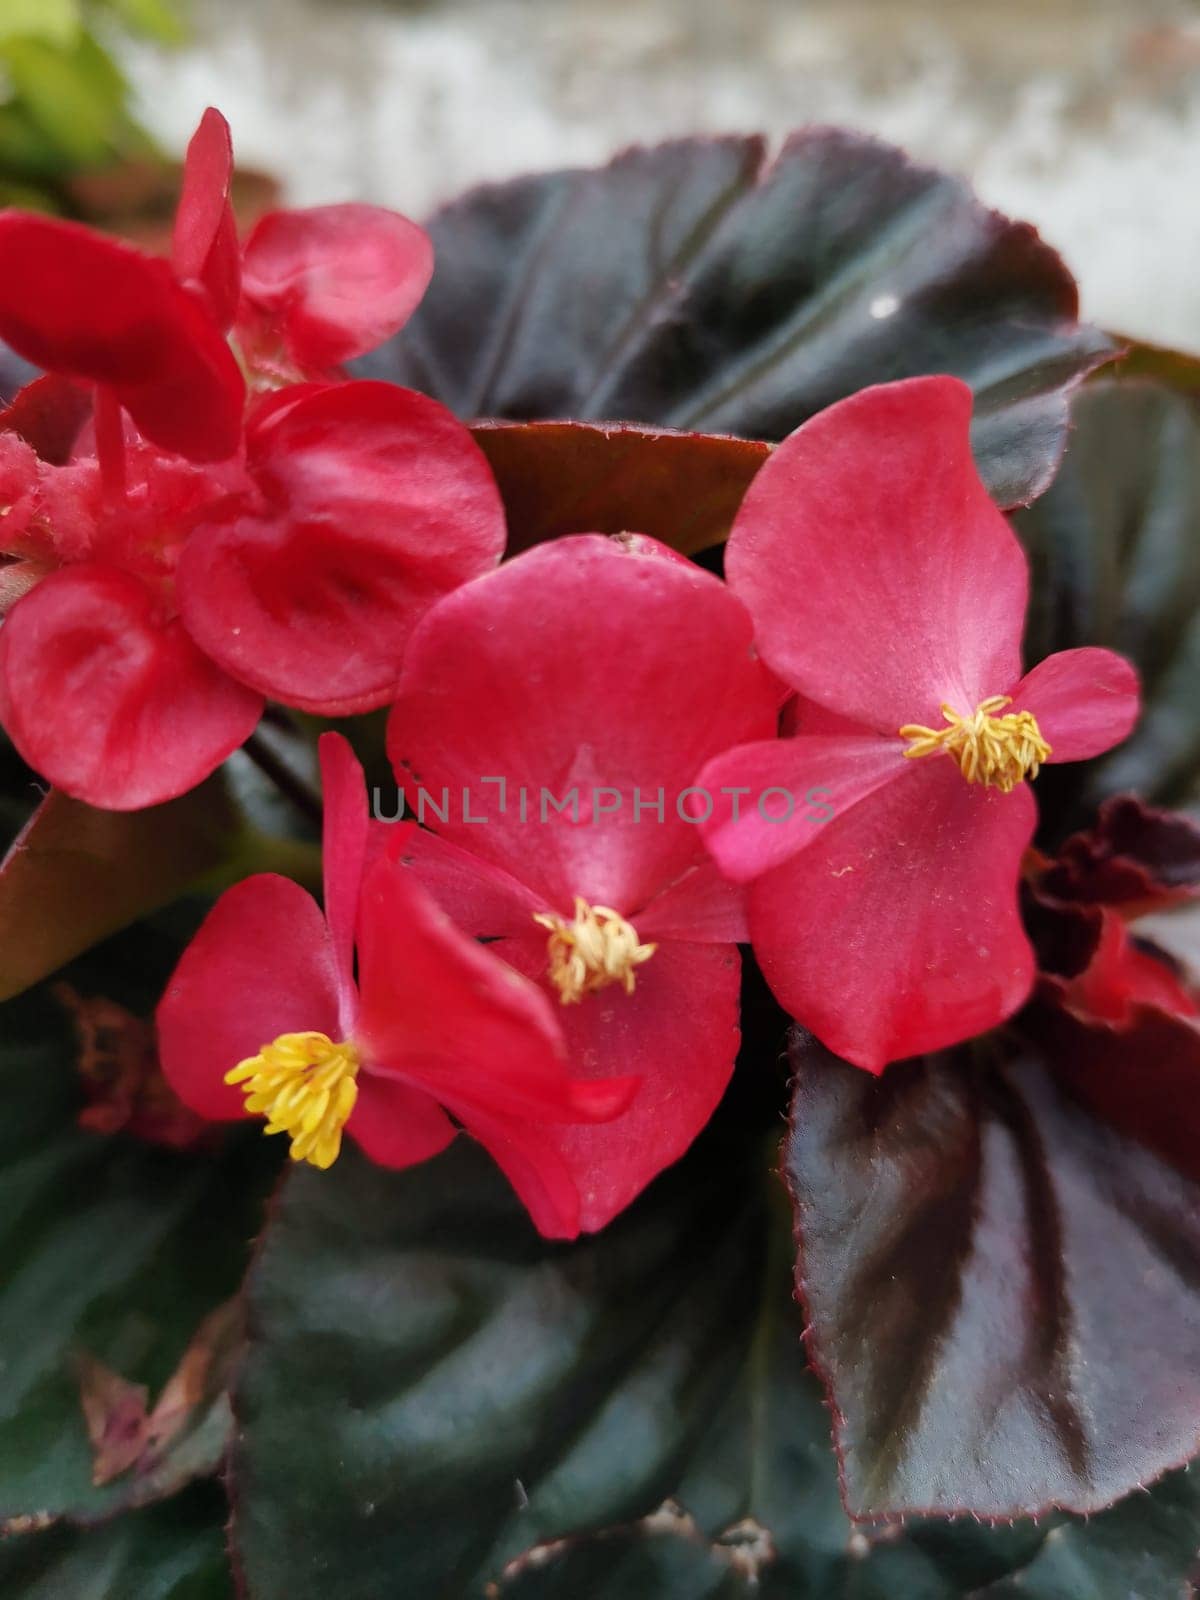 Houseplant begonia blooming with coral flowers, by Fran71